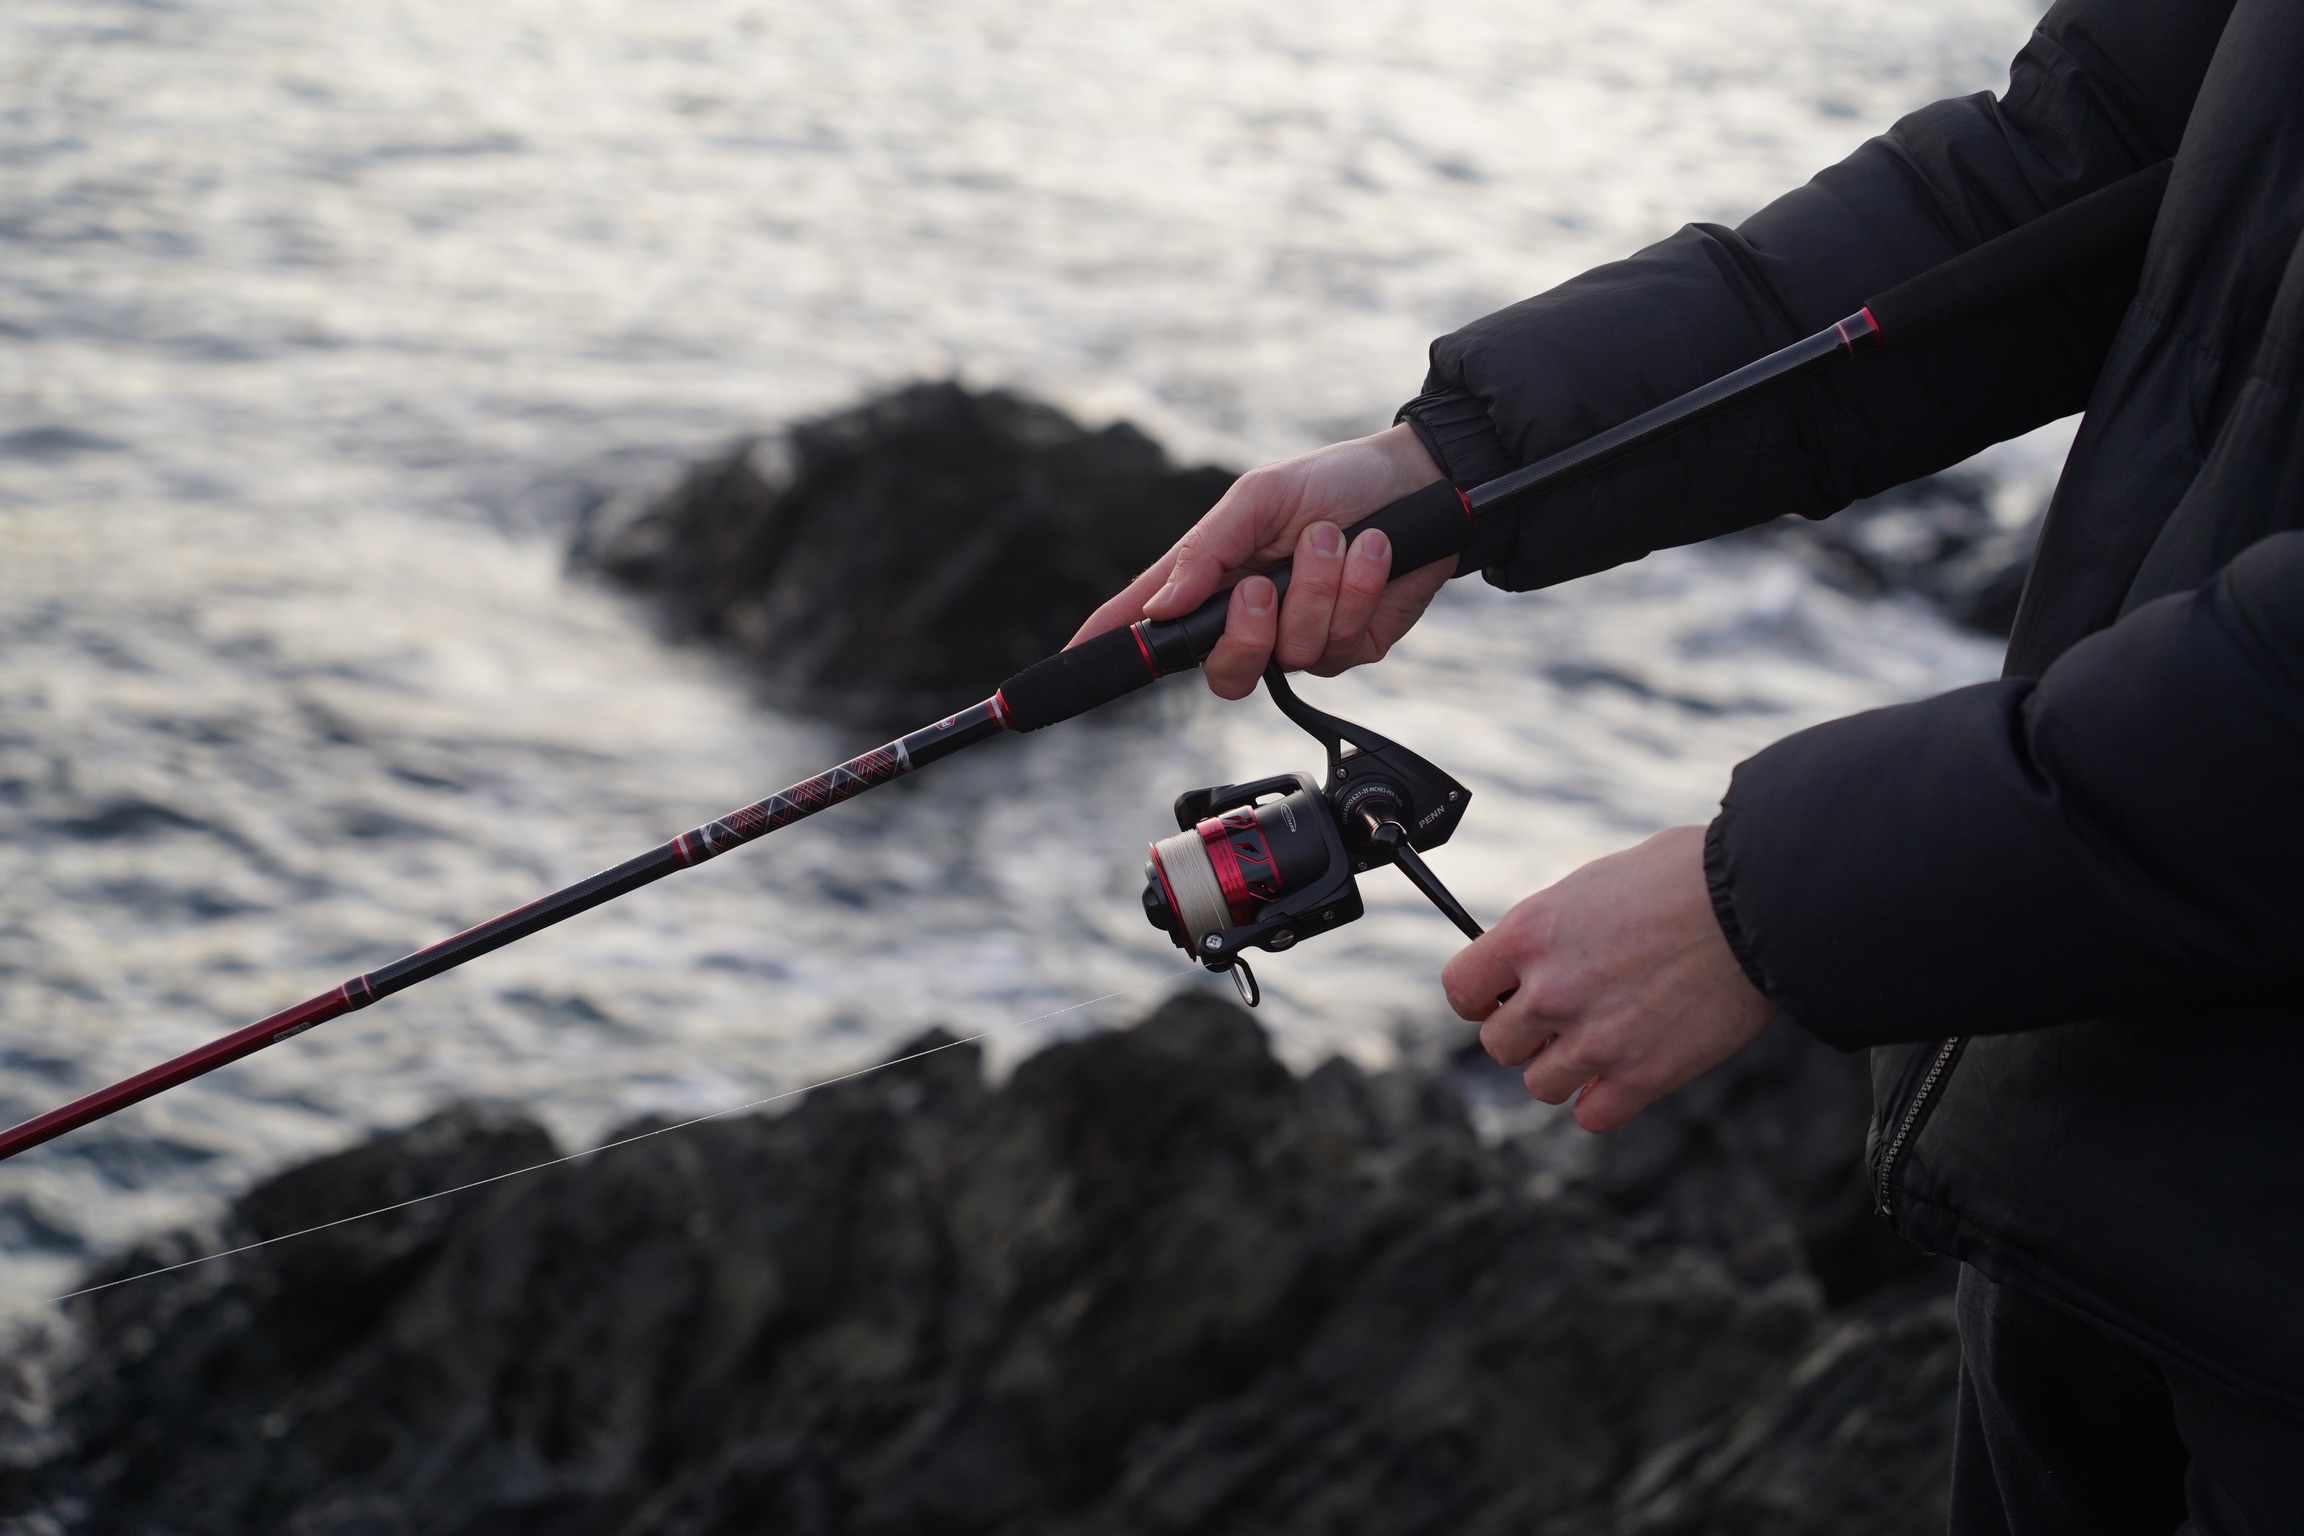 sea fishing with lure fishing gear from the rocks 